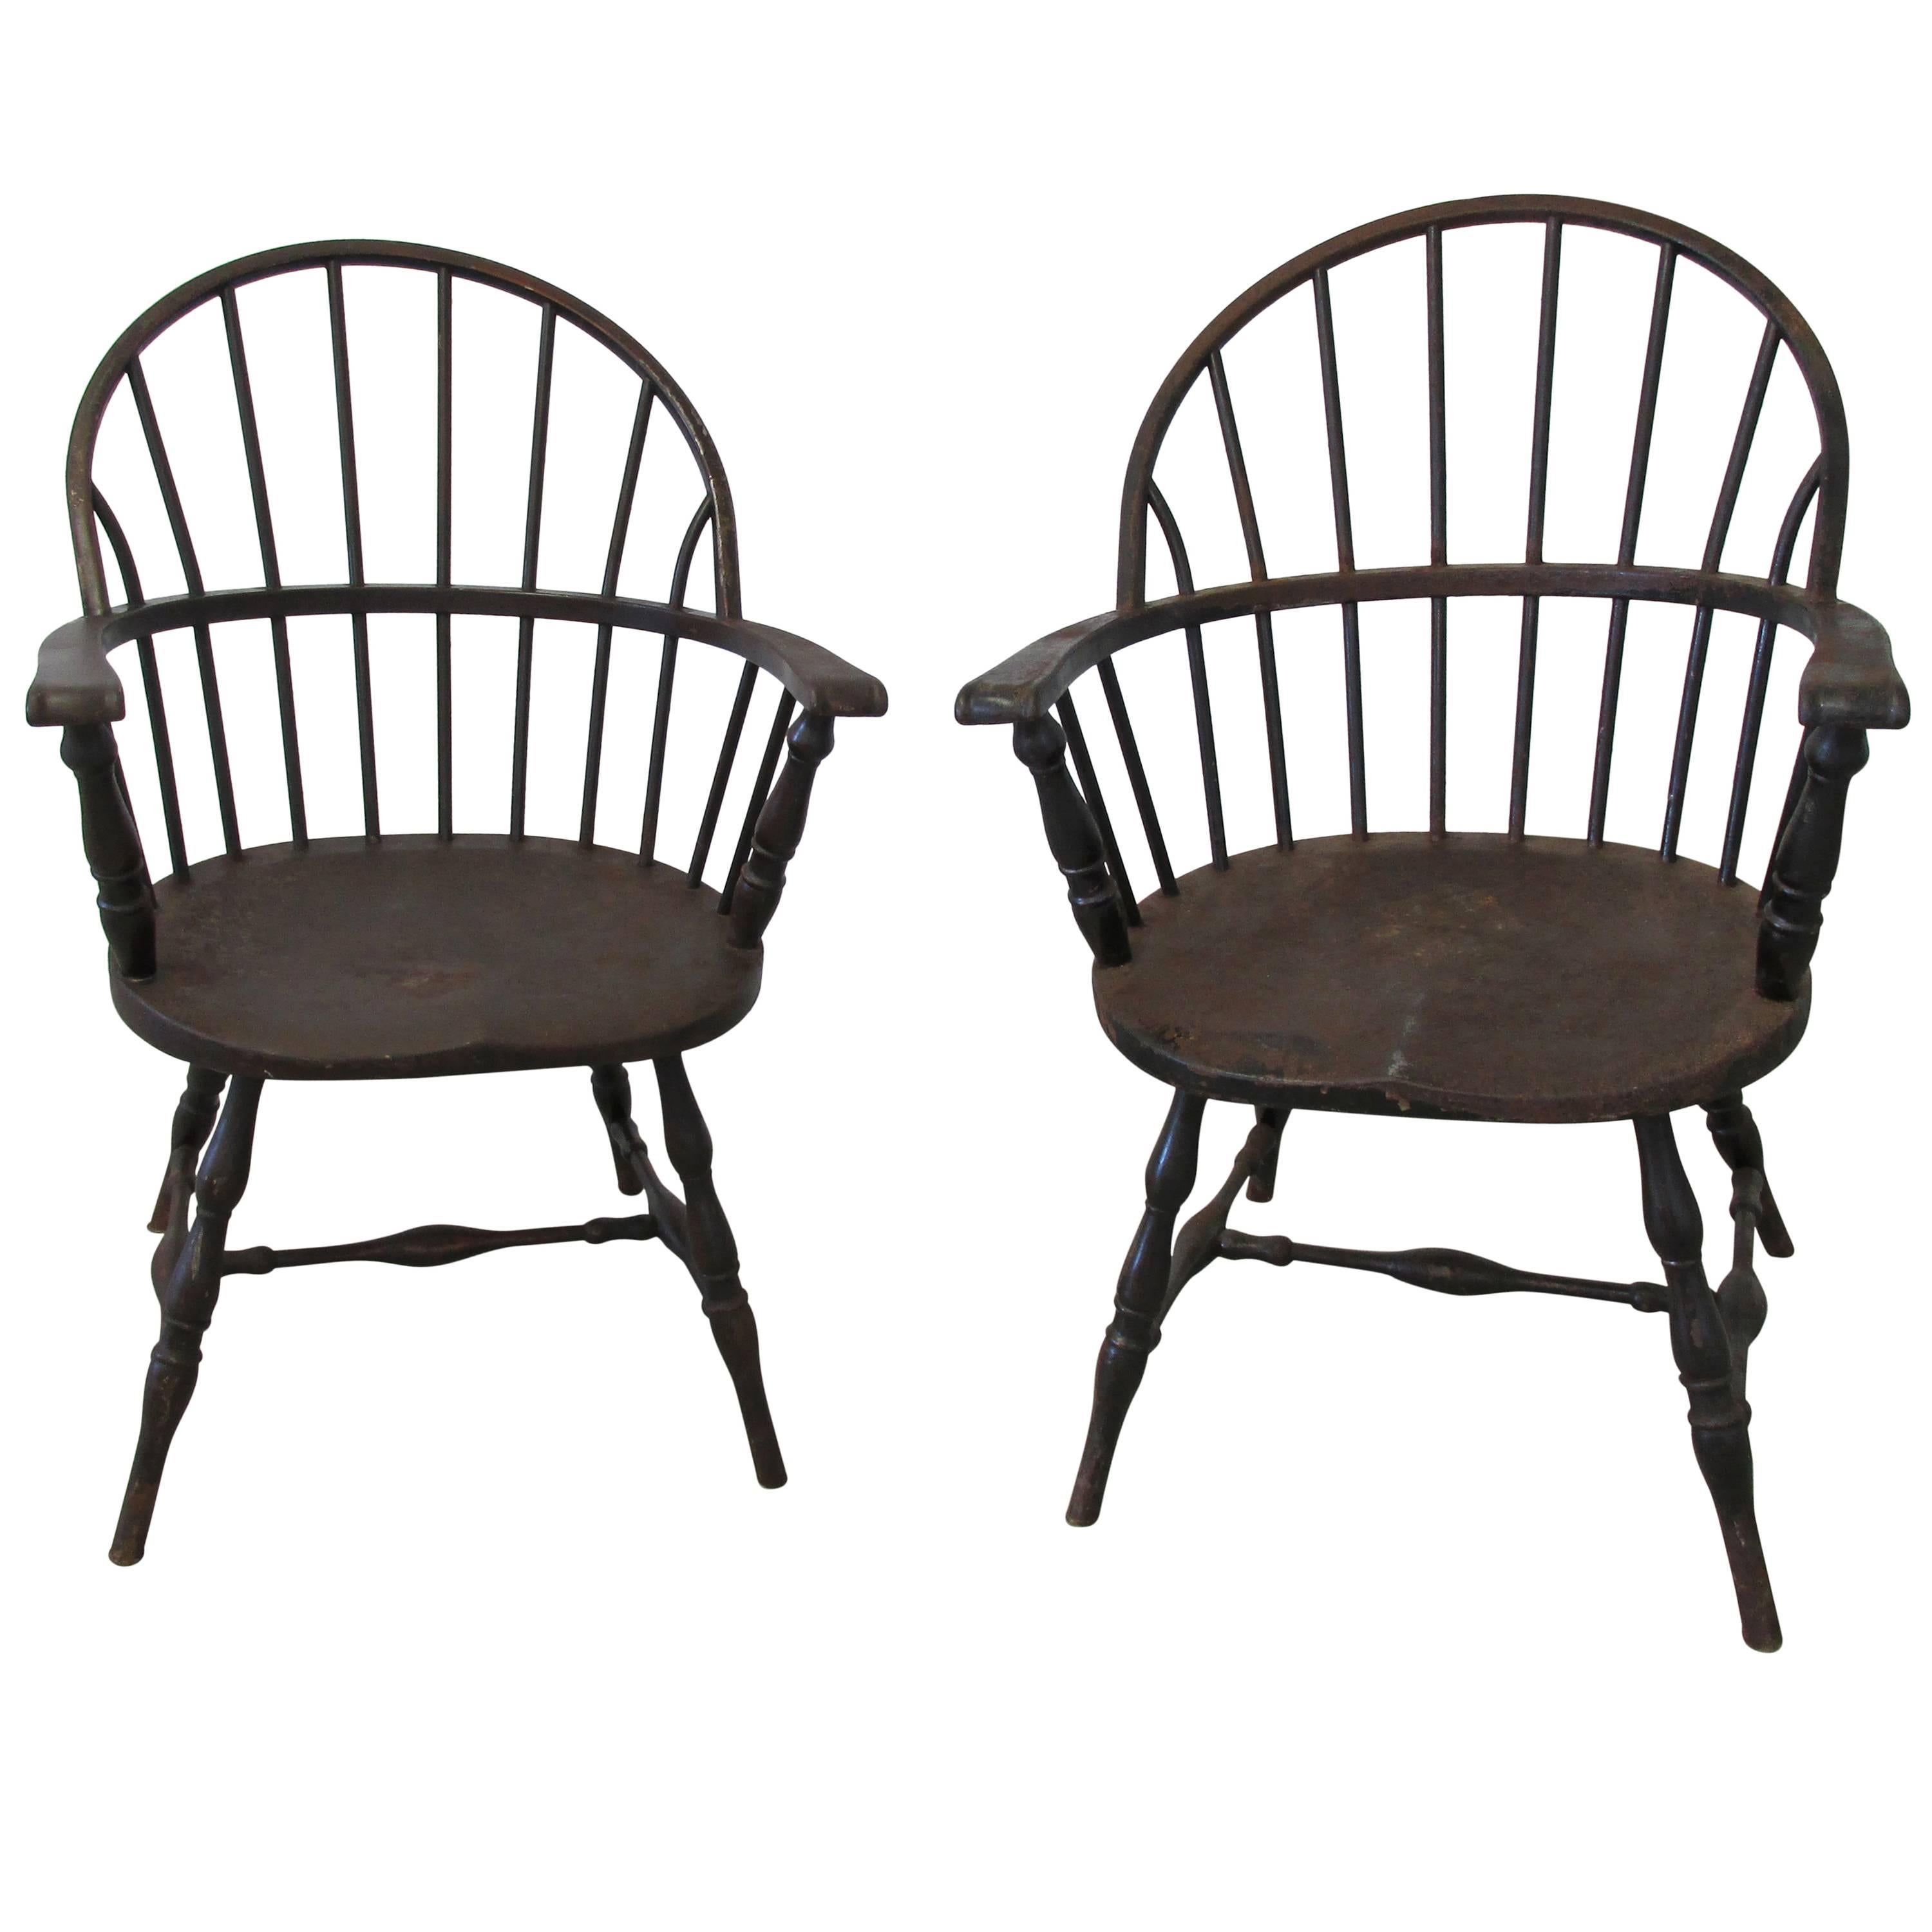 Pair of 1930s Iron Windsor Chairs